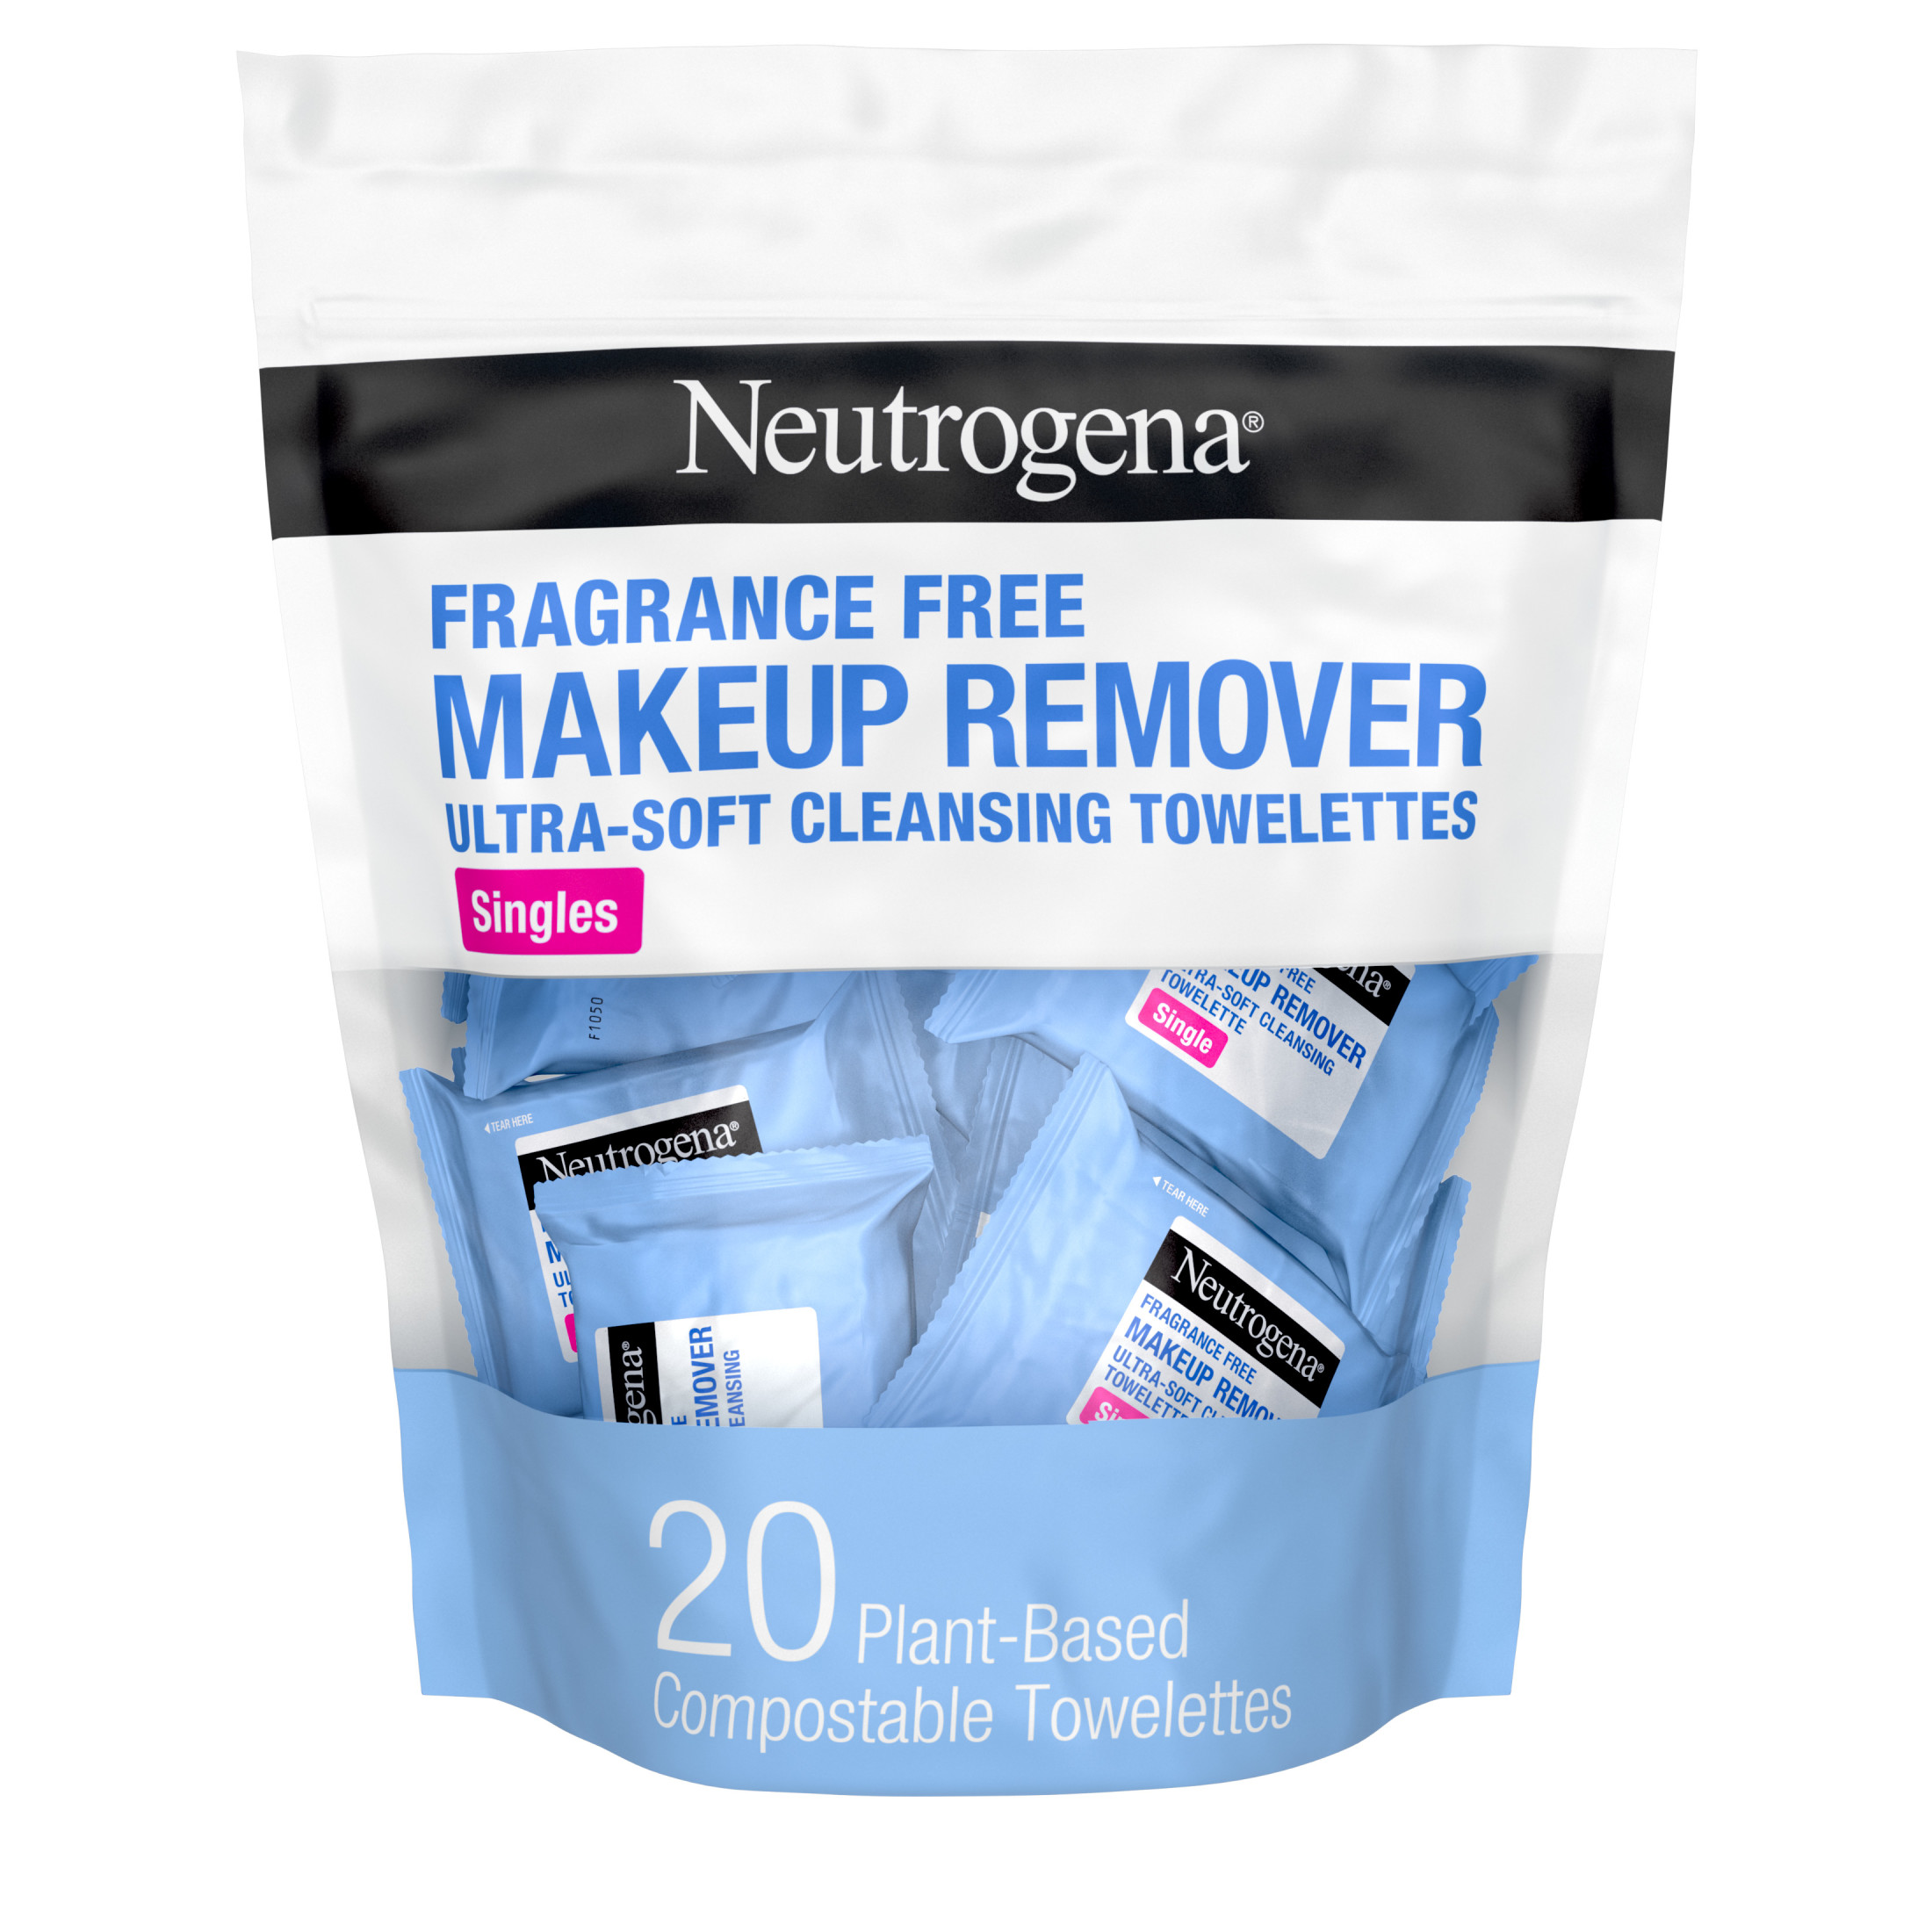 Neutrogena Fragrance-Free Makeup Remover Face Wipe Singles, 20 Ct - image 1 of 11